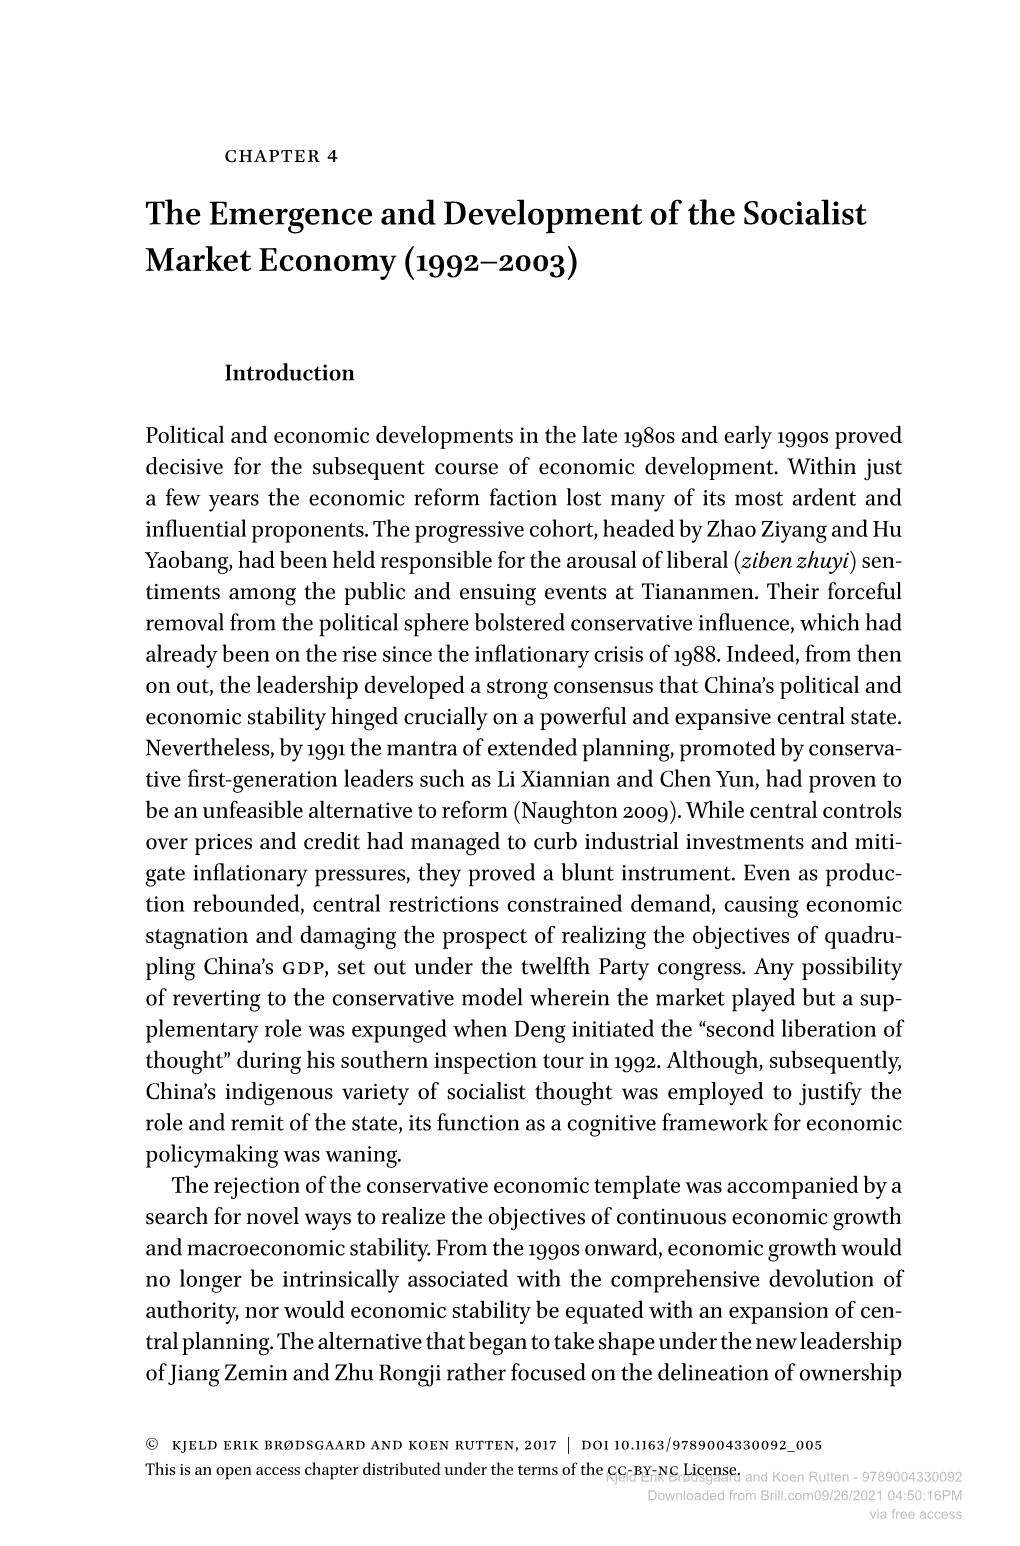 The Emergence and Development of the Socialist Market Economy (1992–2003)